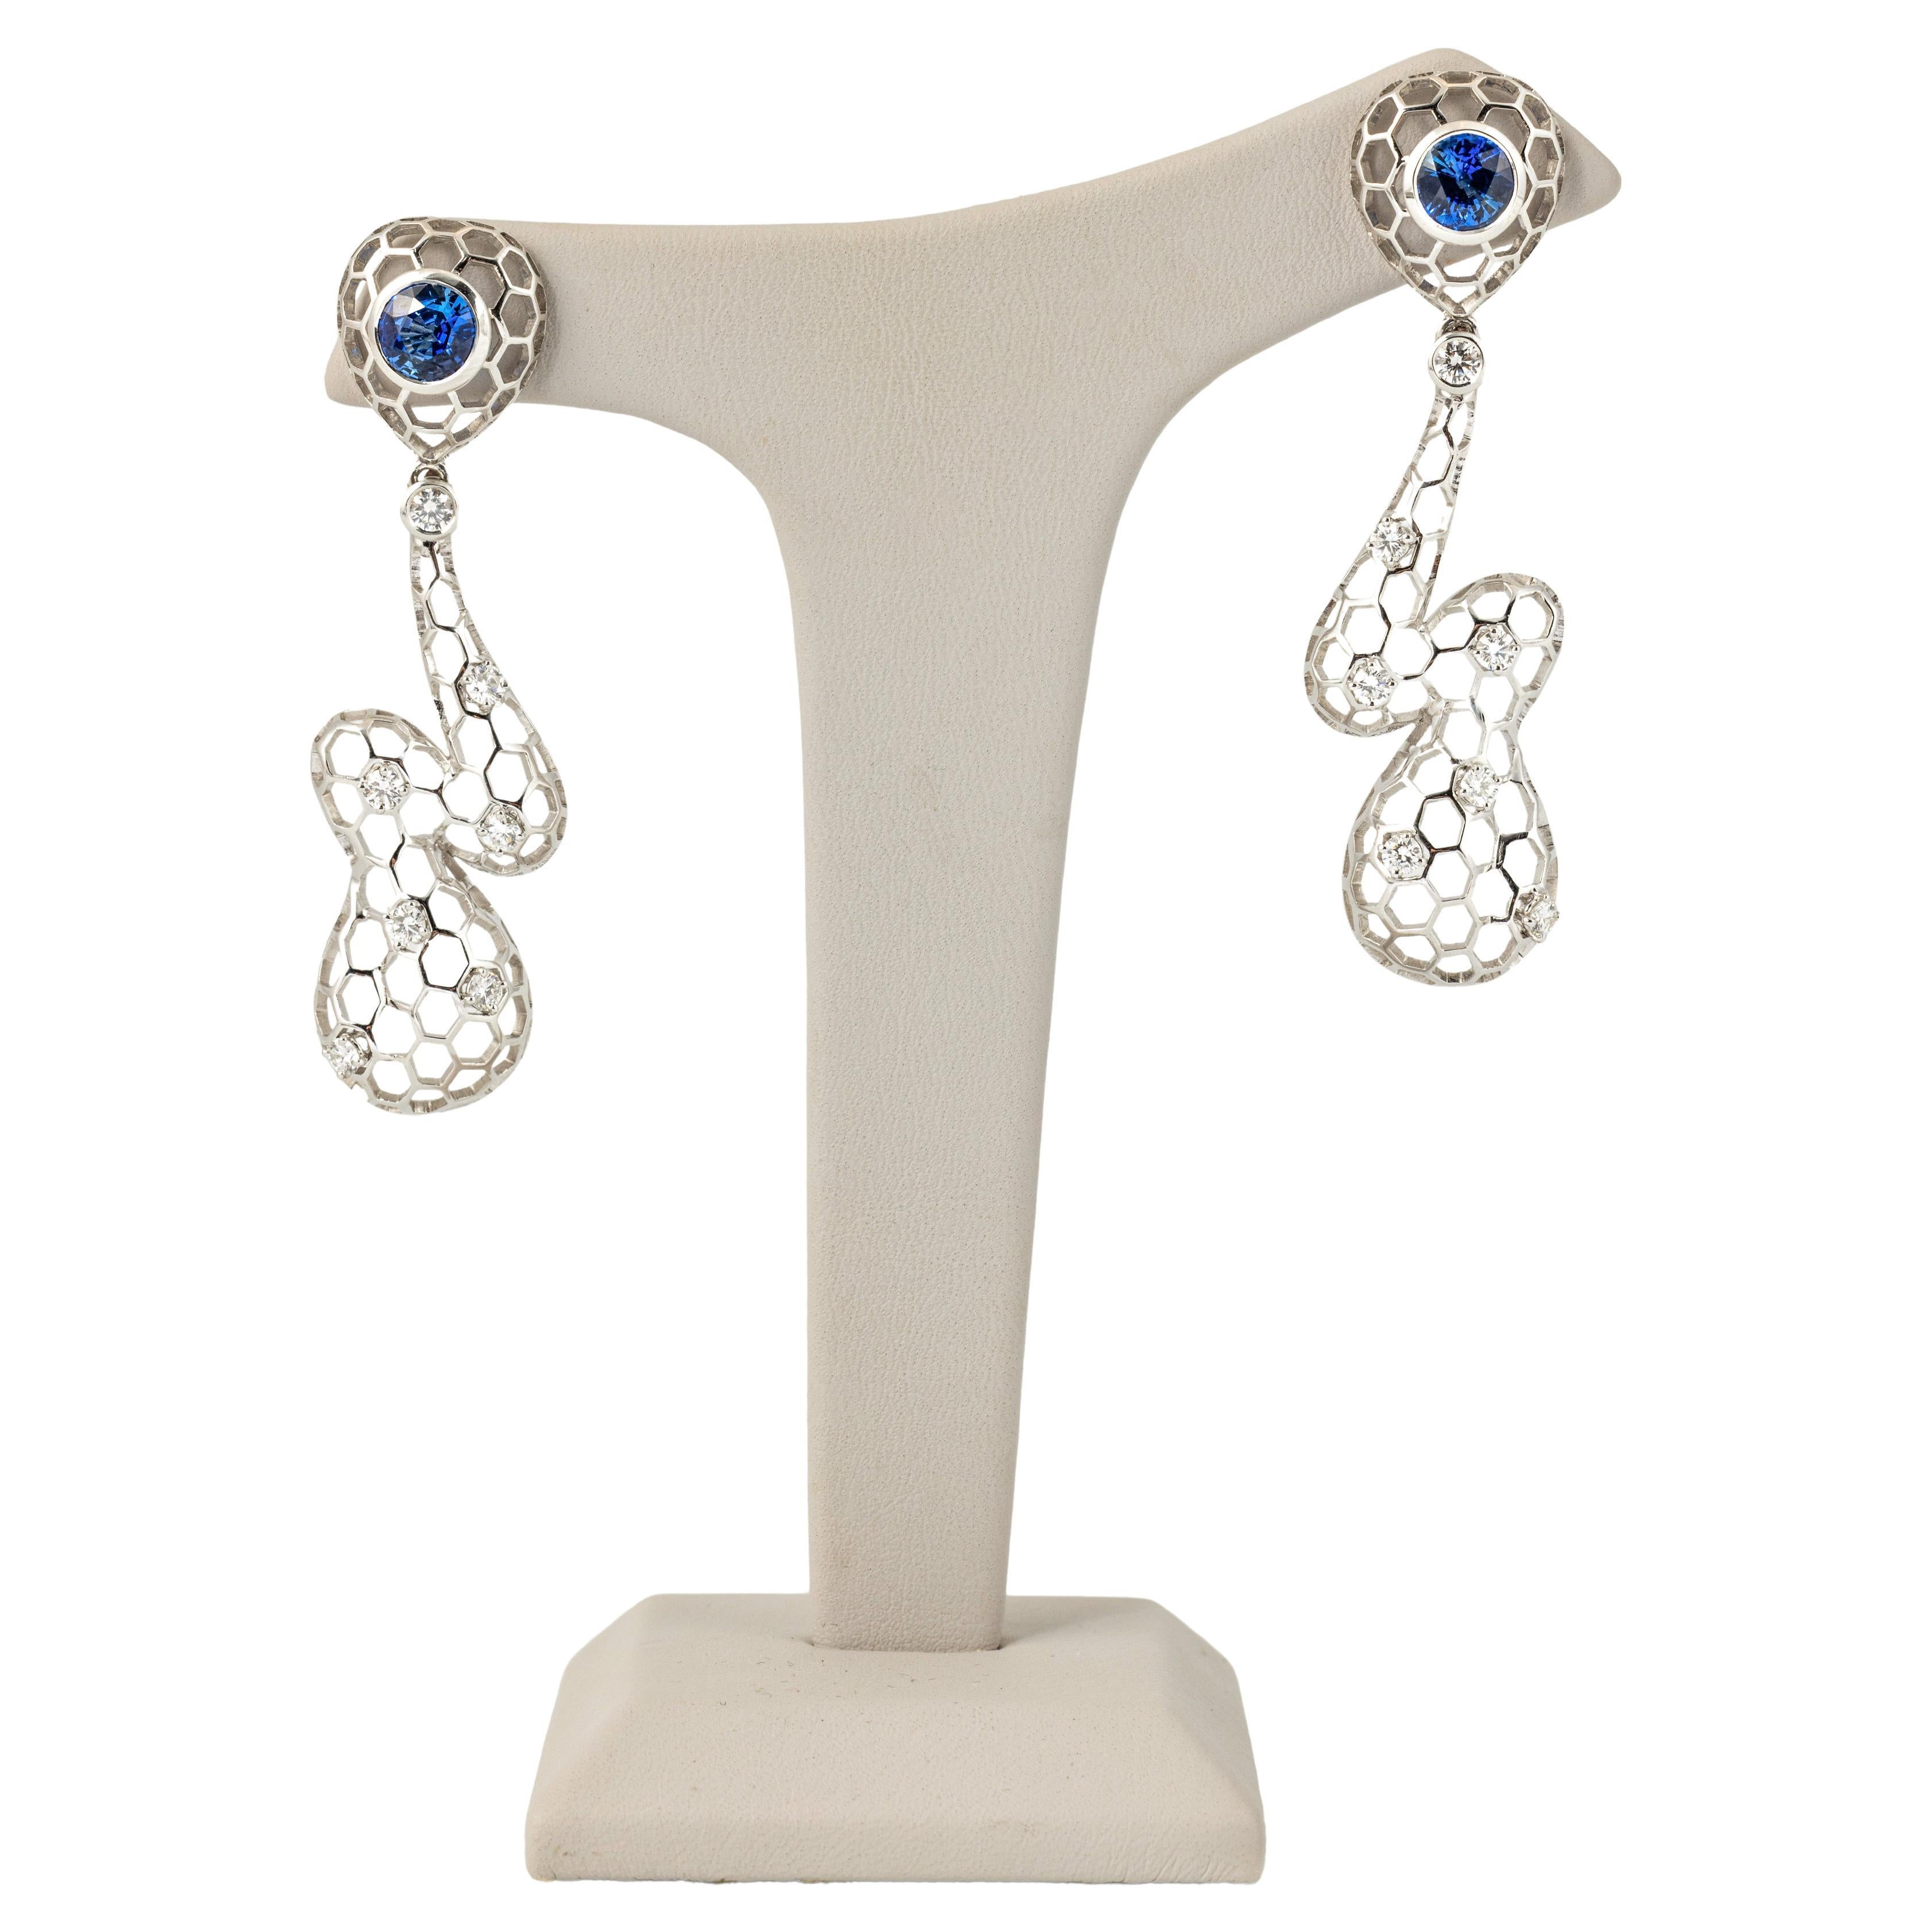 "Costis" Precious Beehive Collection Drop Earrings - Blue Sapphires 3.86 cts